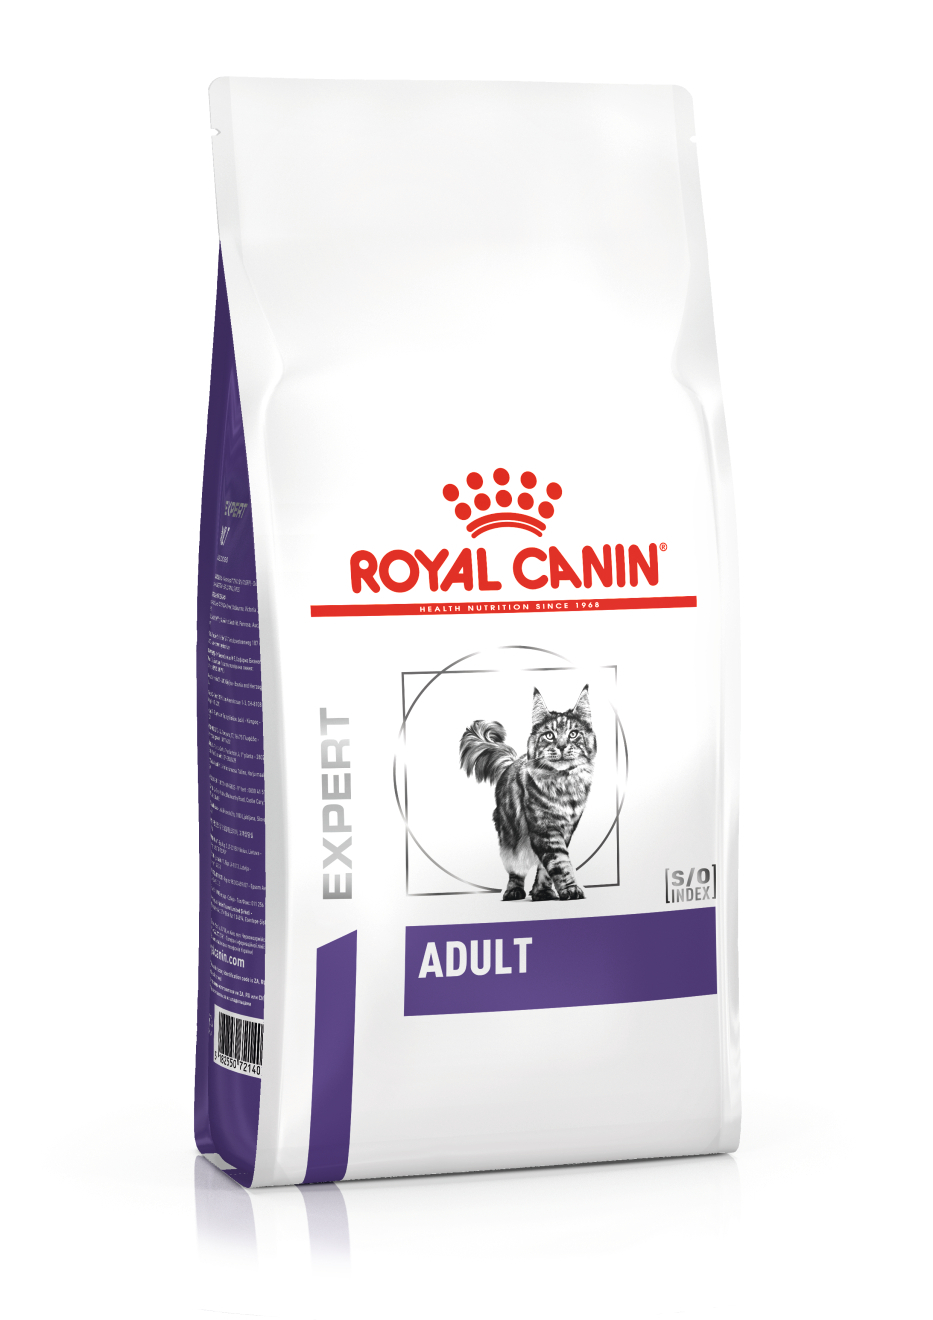 Royal Canin Veterinary Diet VCN Cat Adult